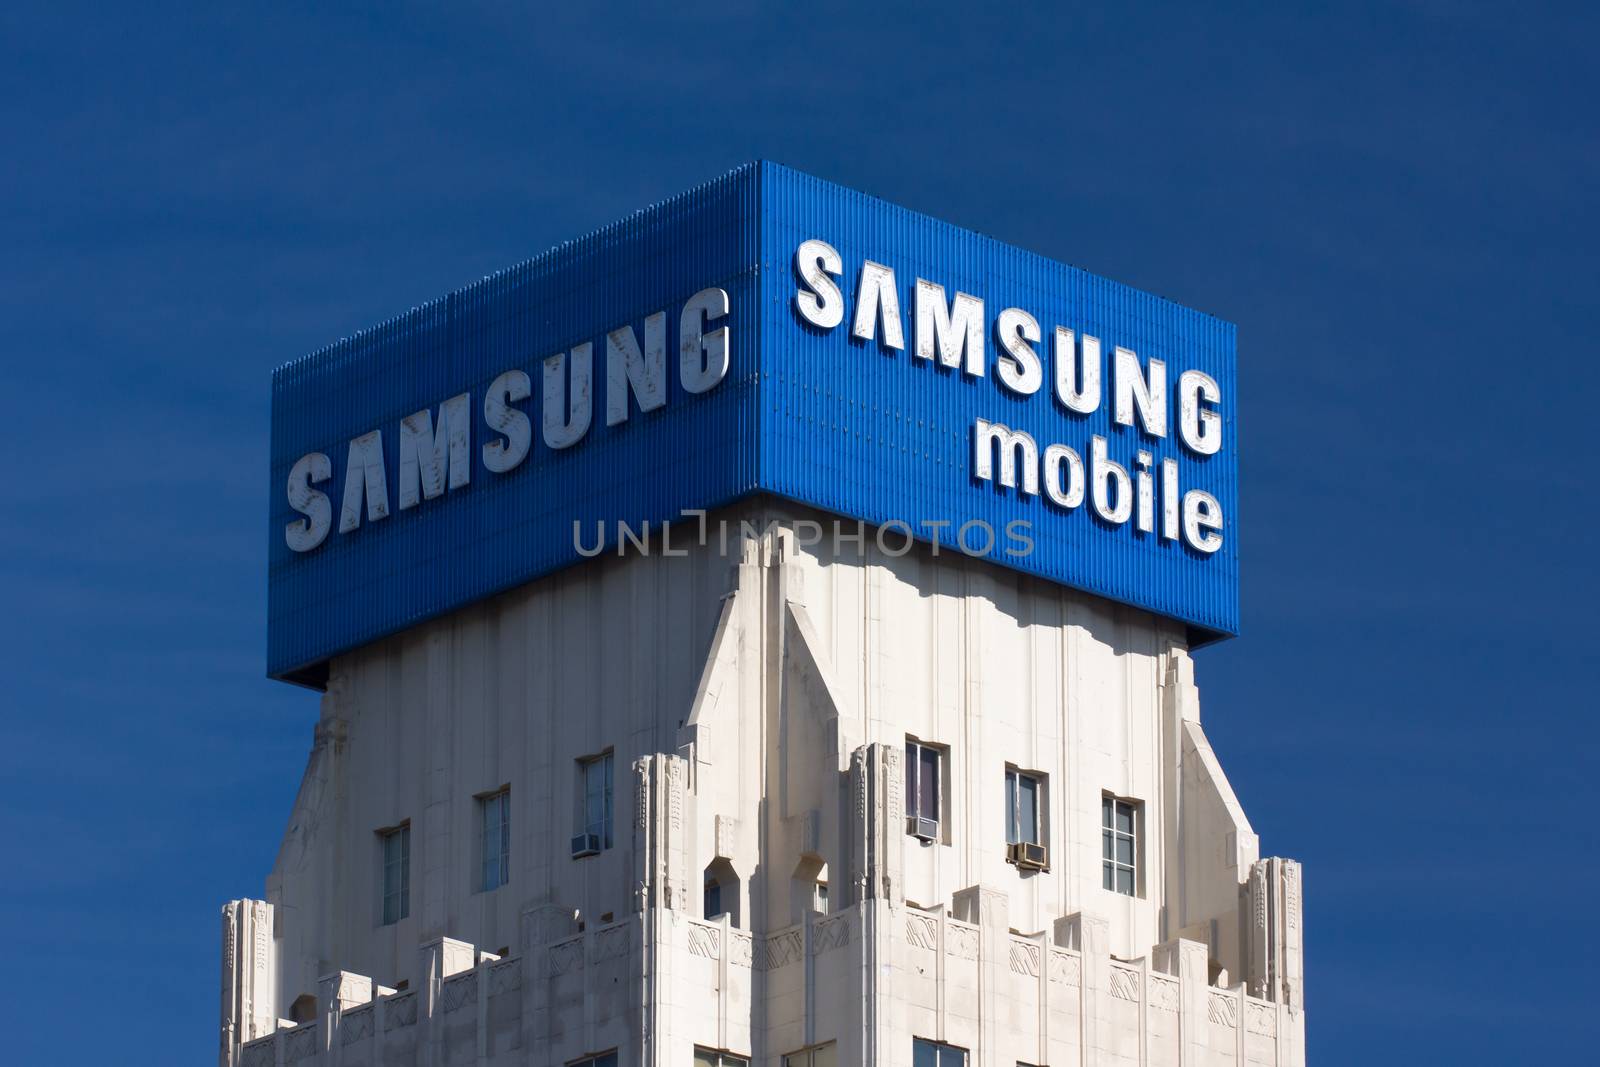 LOS ANGELES, CA/USA - NOVEMBER 29, 2014: Samsung Mobile advertisement and logo. Samsung is a South Korean multinational conglomerate company.